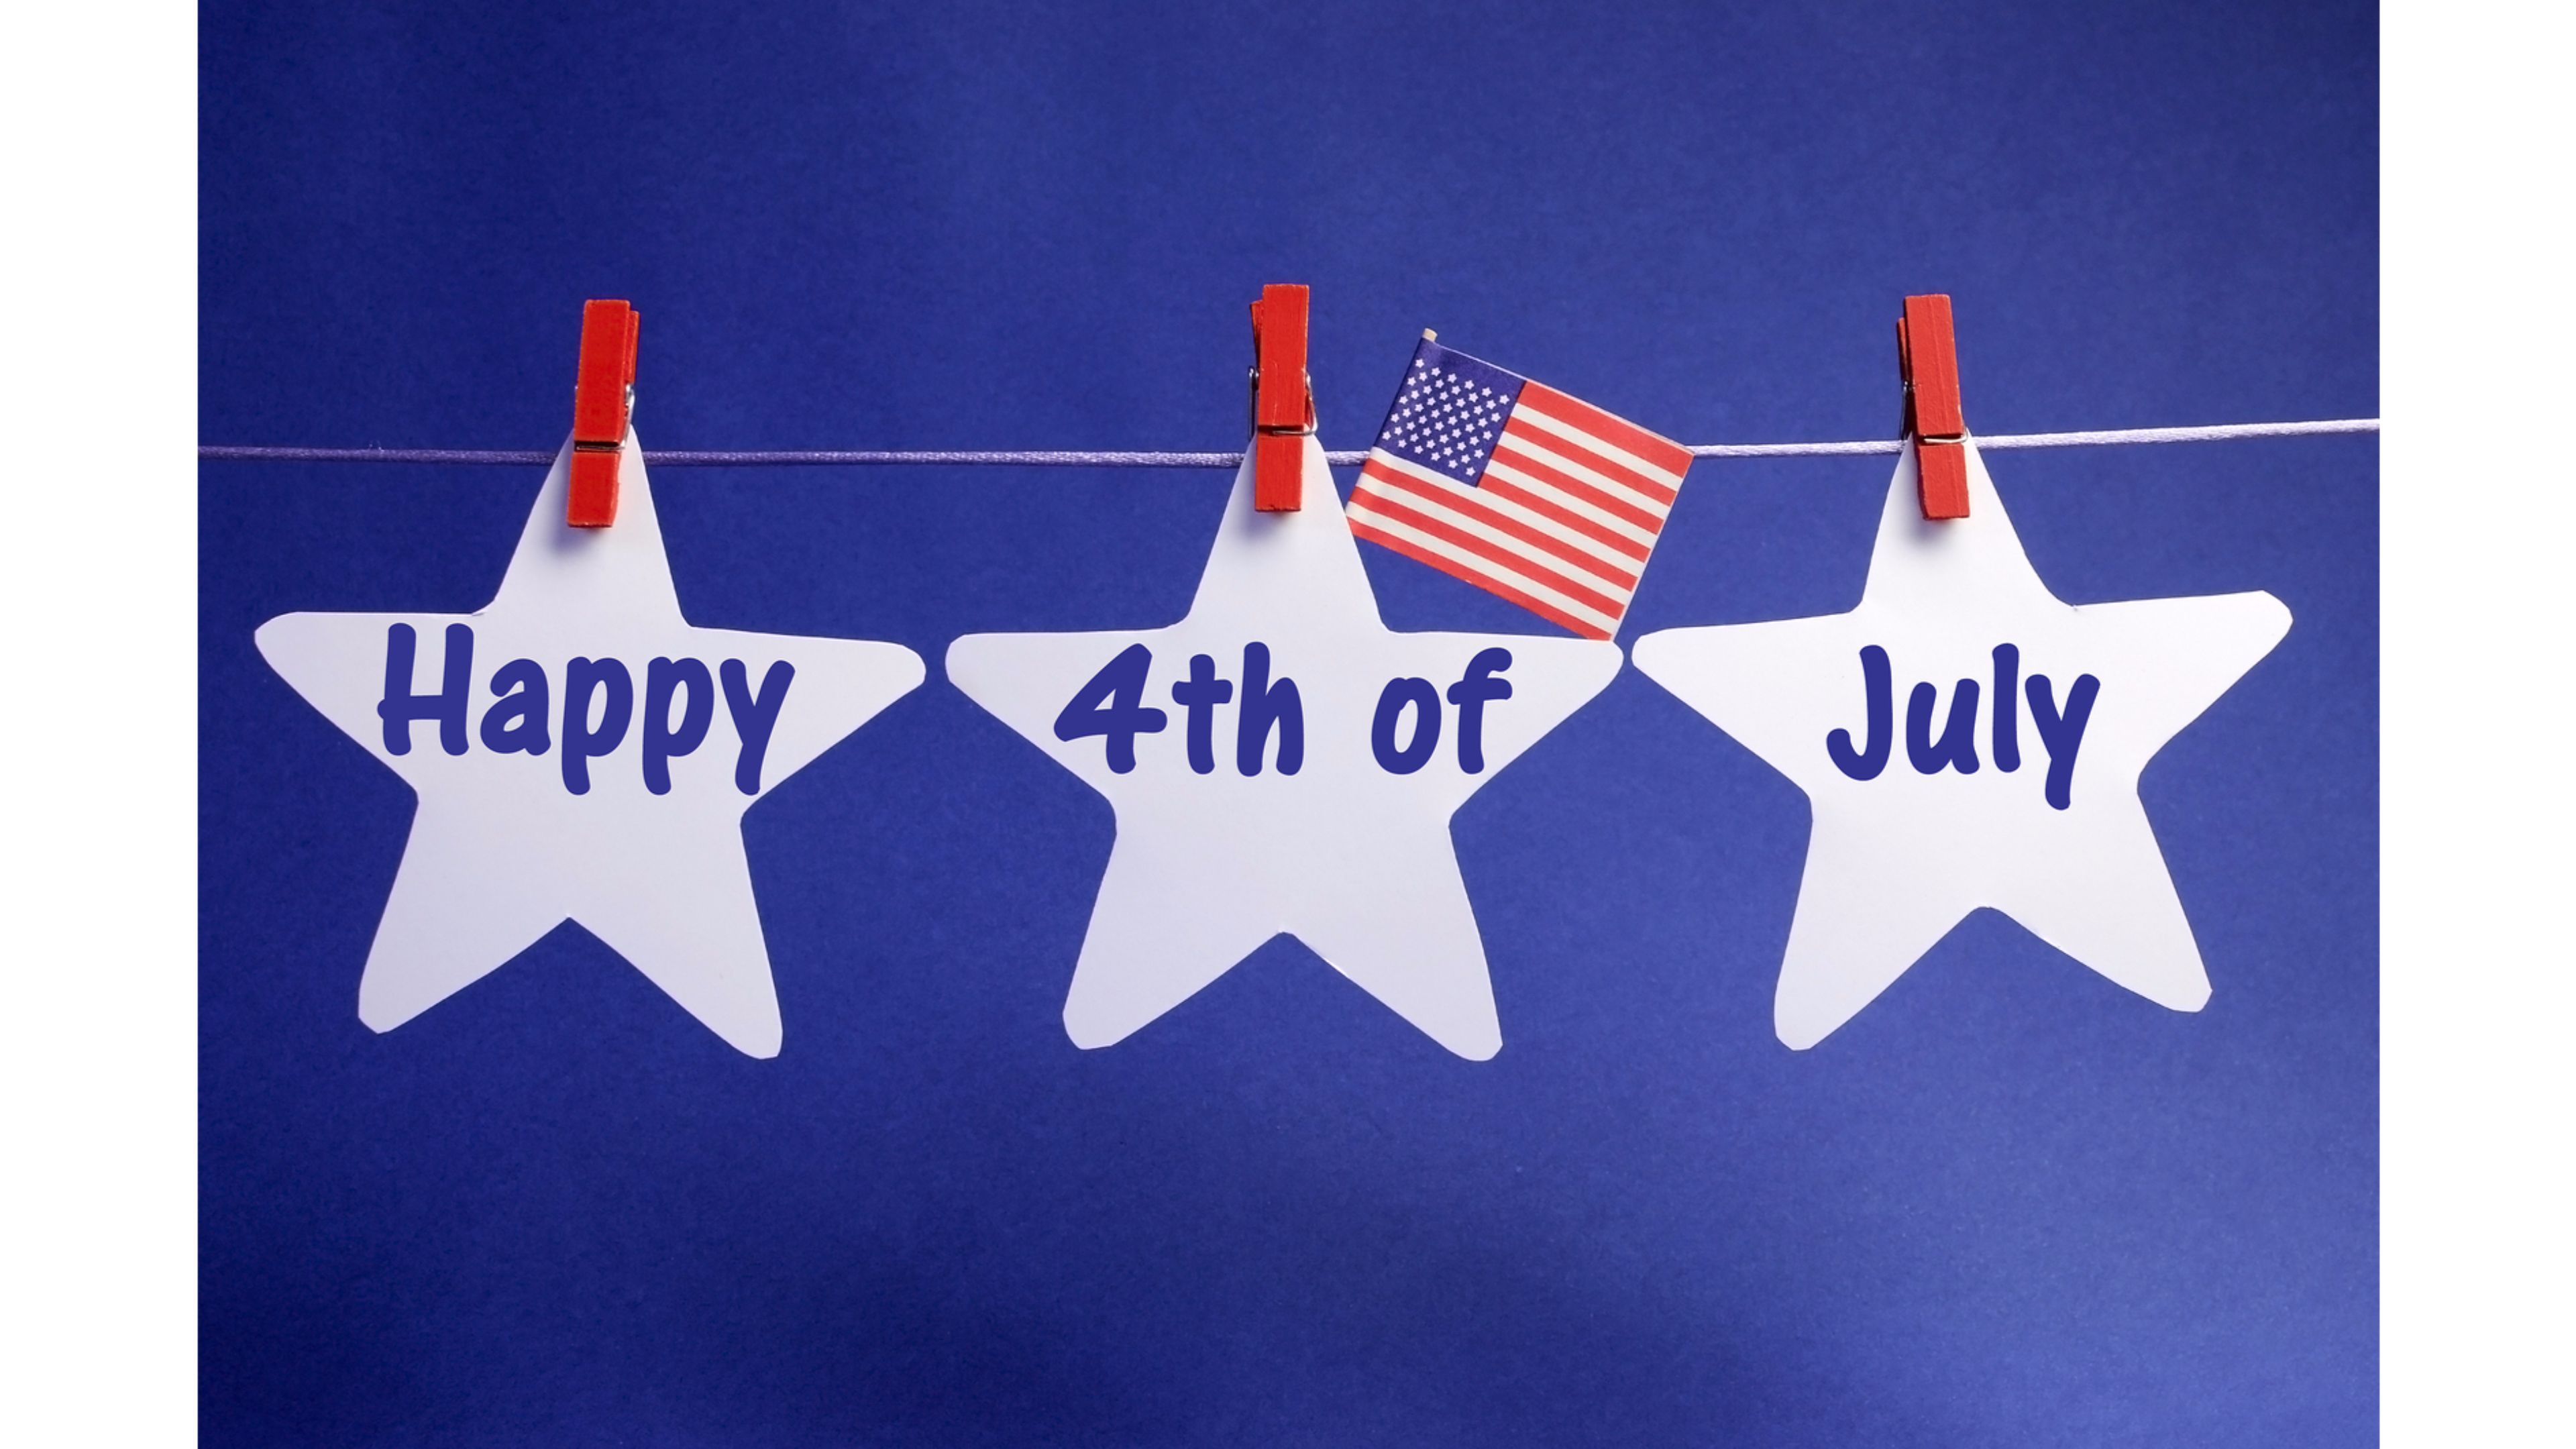 4th of July FREE Calendar  4th of july wallpaper 4th of july images  Fourth of july